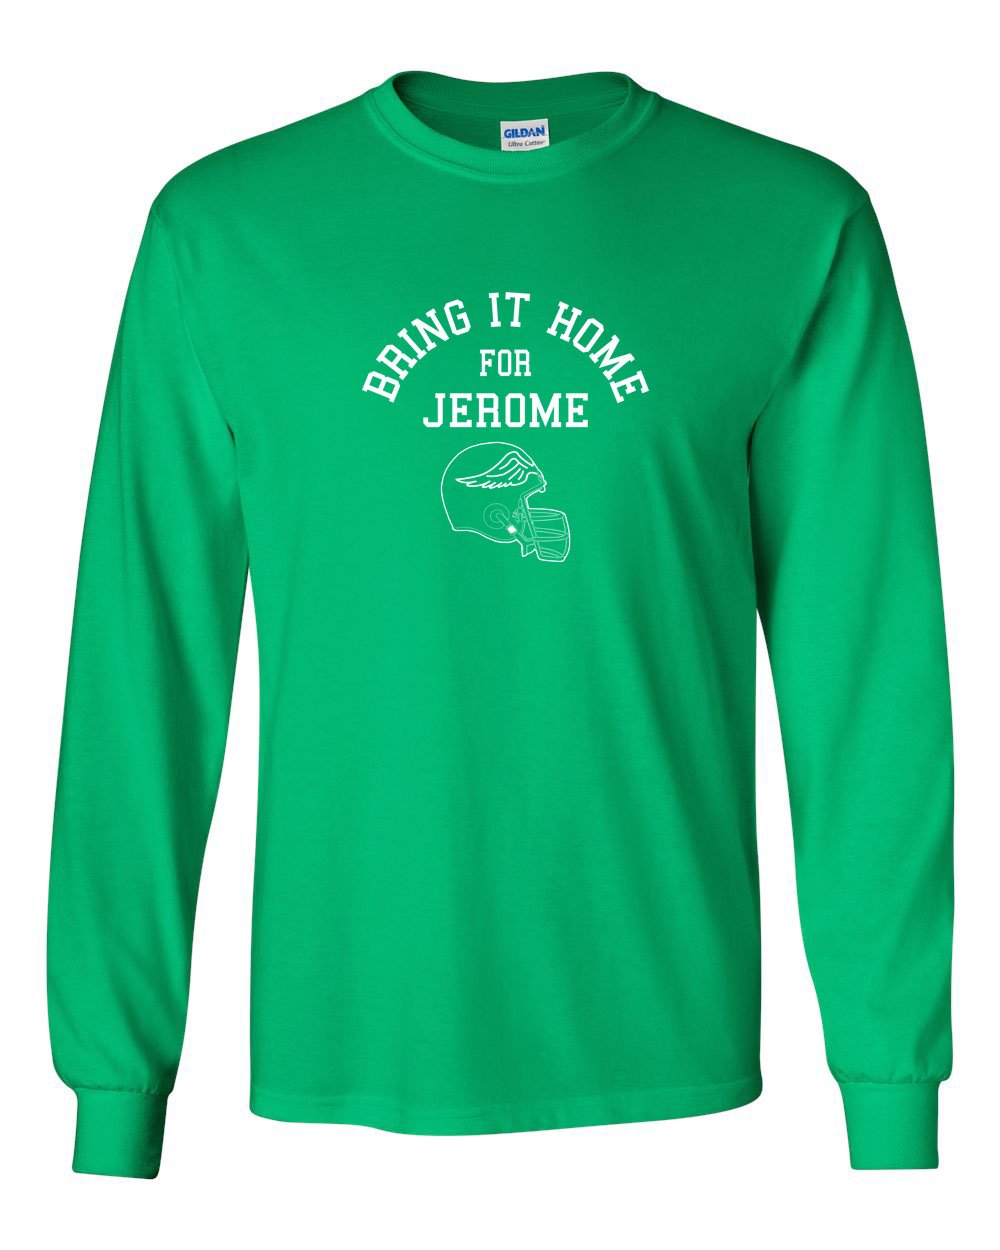 Bring It Home For Jerome MENS Long Sleeve Heavy Cotton T-Shirt